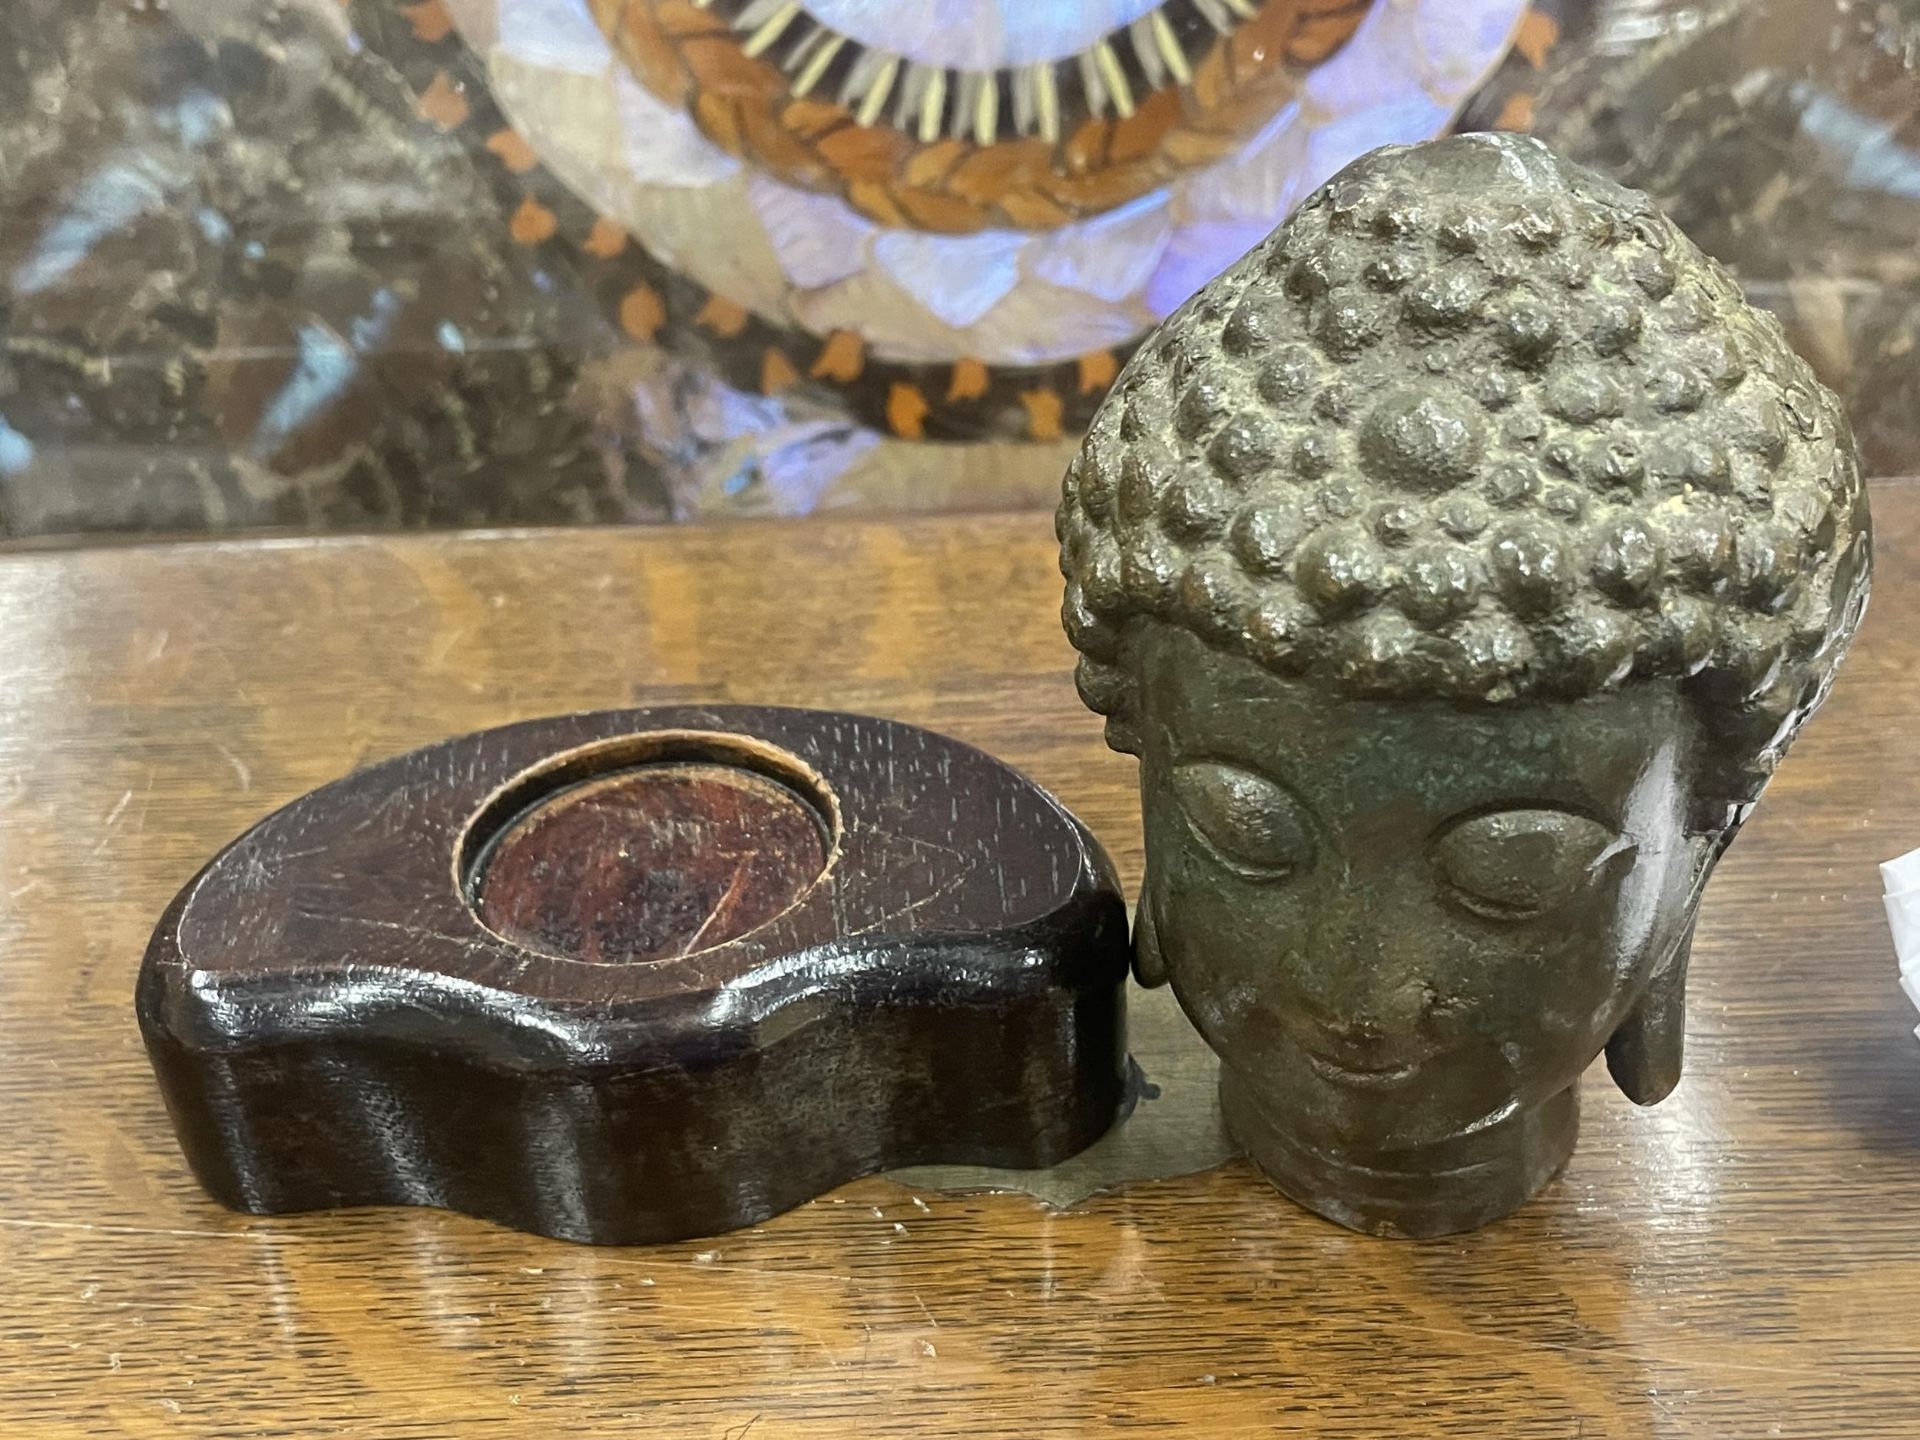 A BRONZE EFFECT BUDDHA HEAD MODEL ON WOODEN BASE - Image 3 of 3